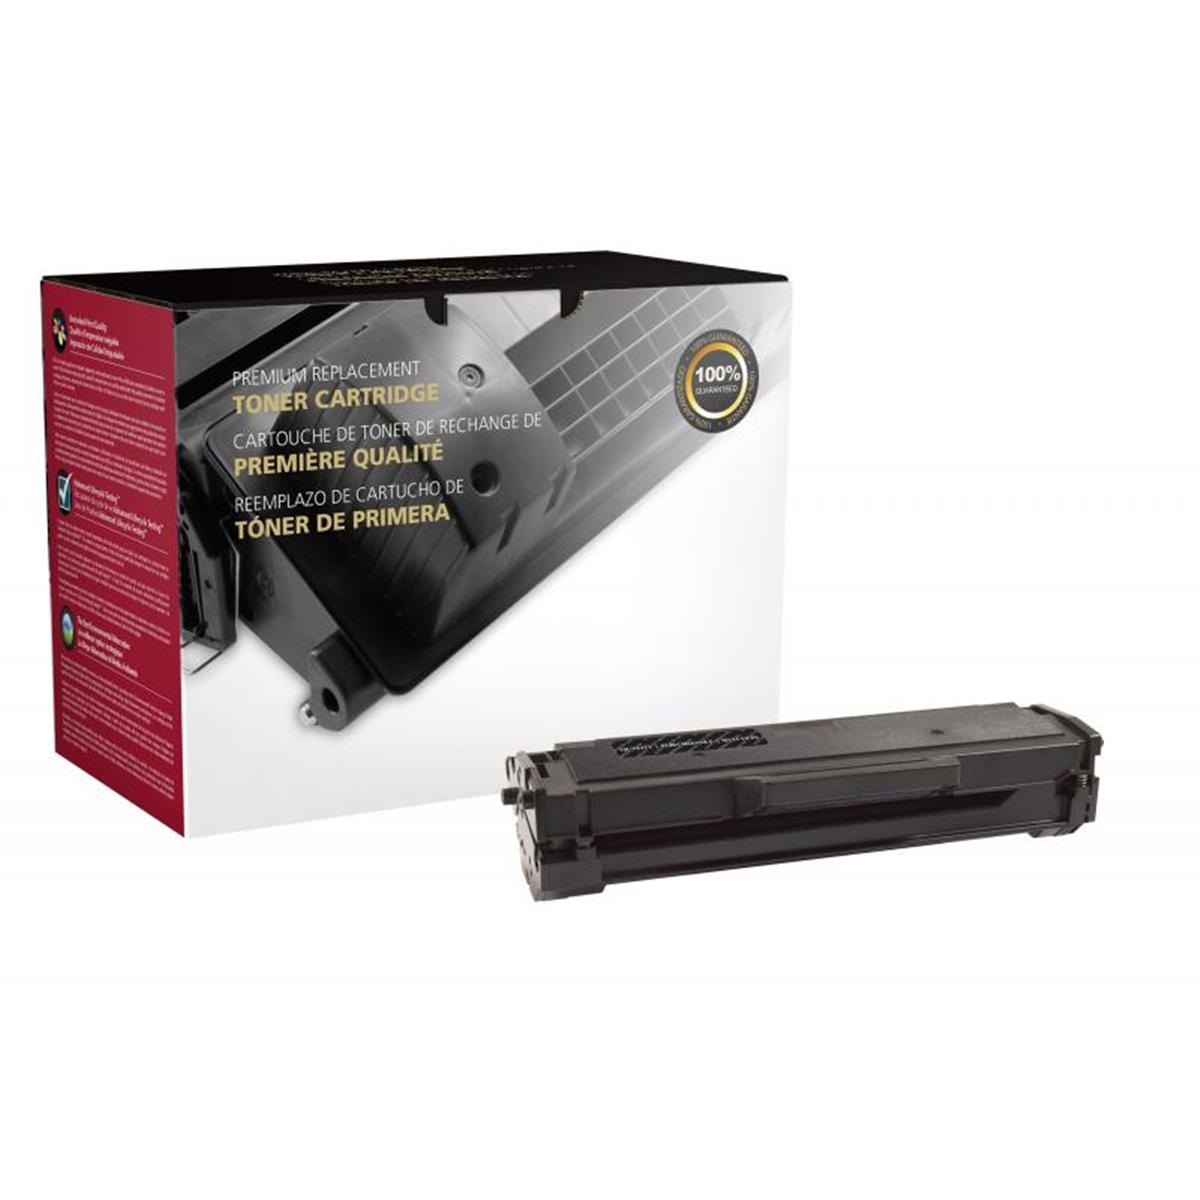 Picture of Dell 200765 Toner Cartridge for Dell B1160